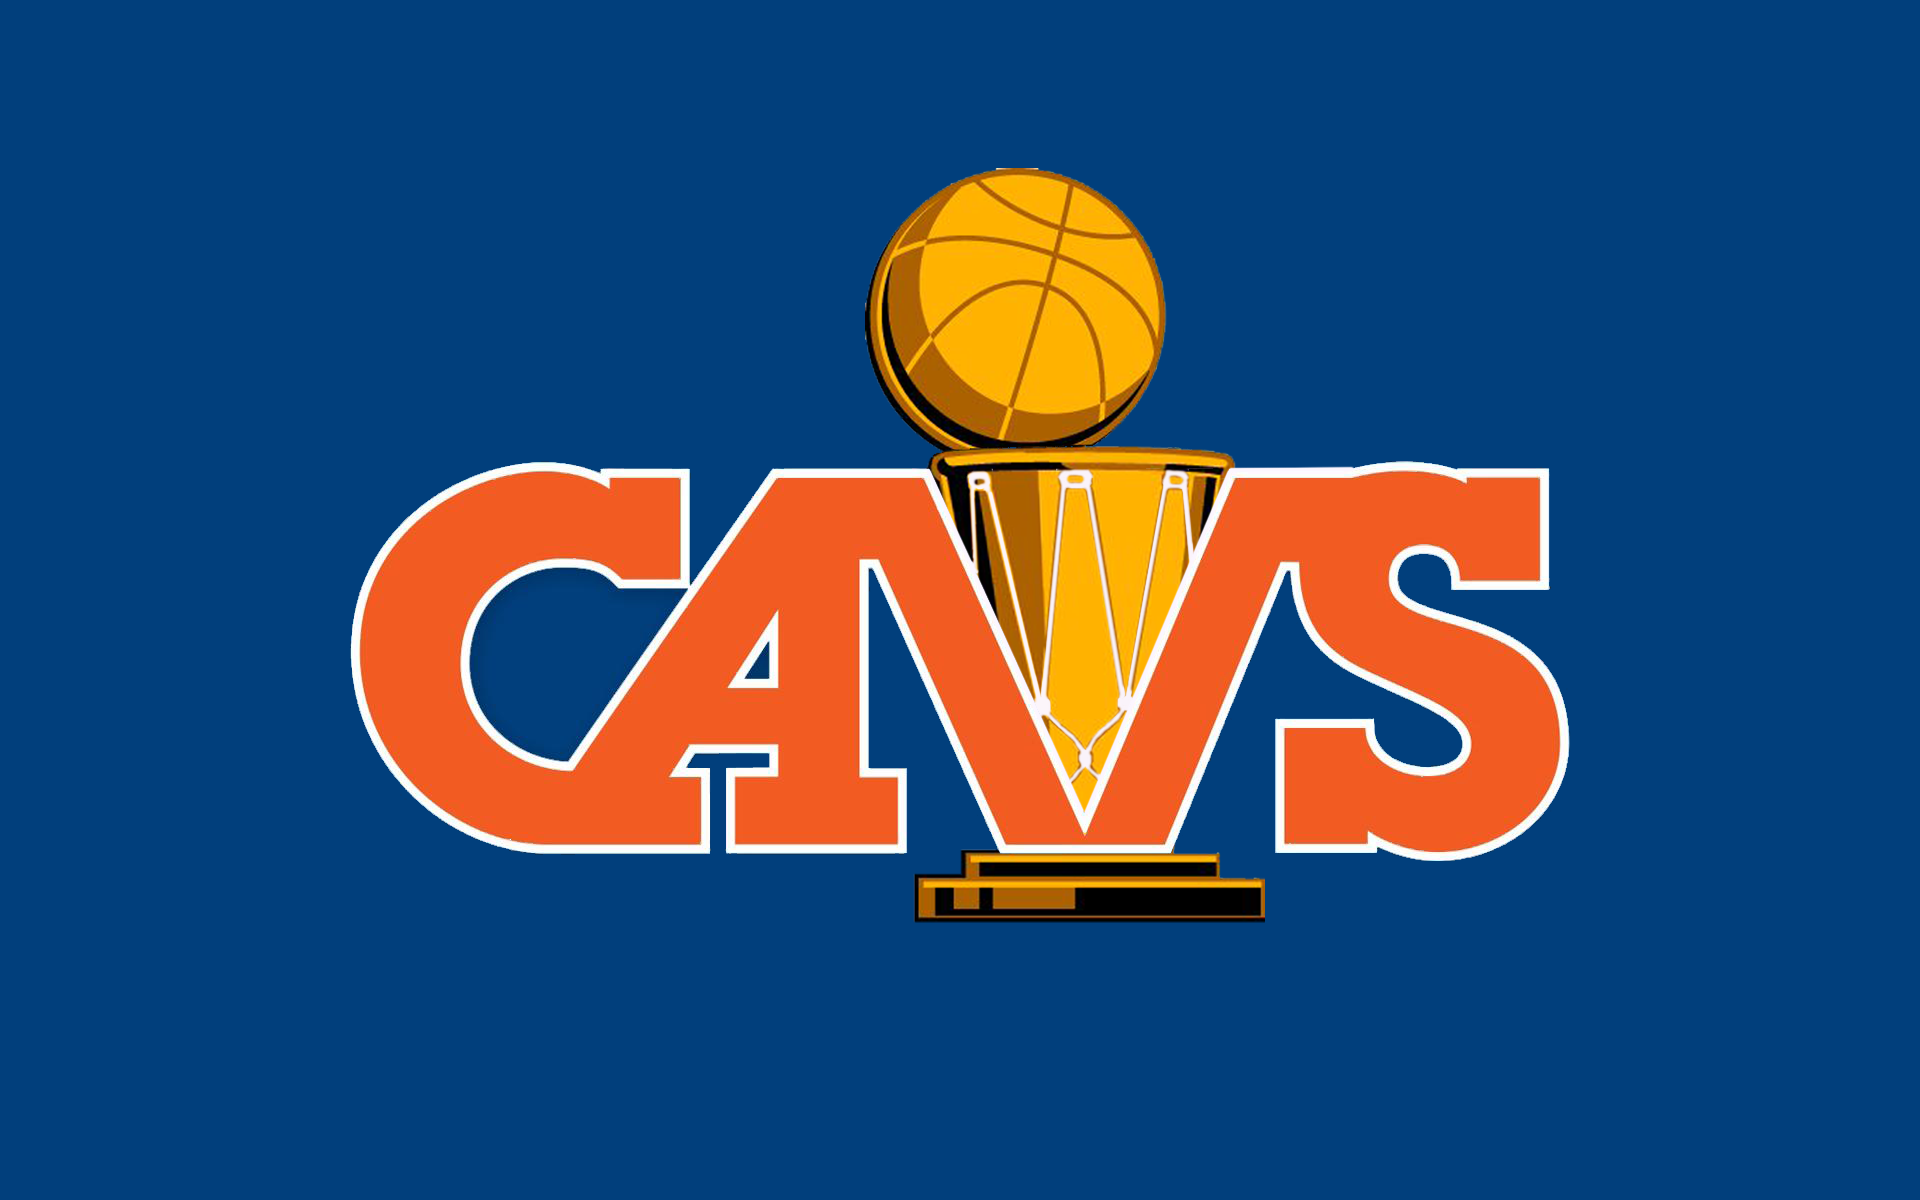 CAVS Old School Logo with NBA Champs Trophy - Imgur